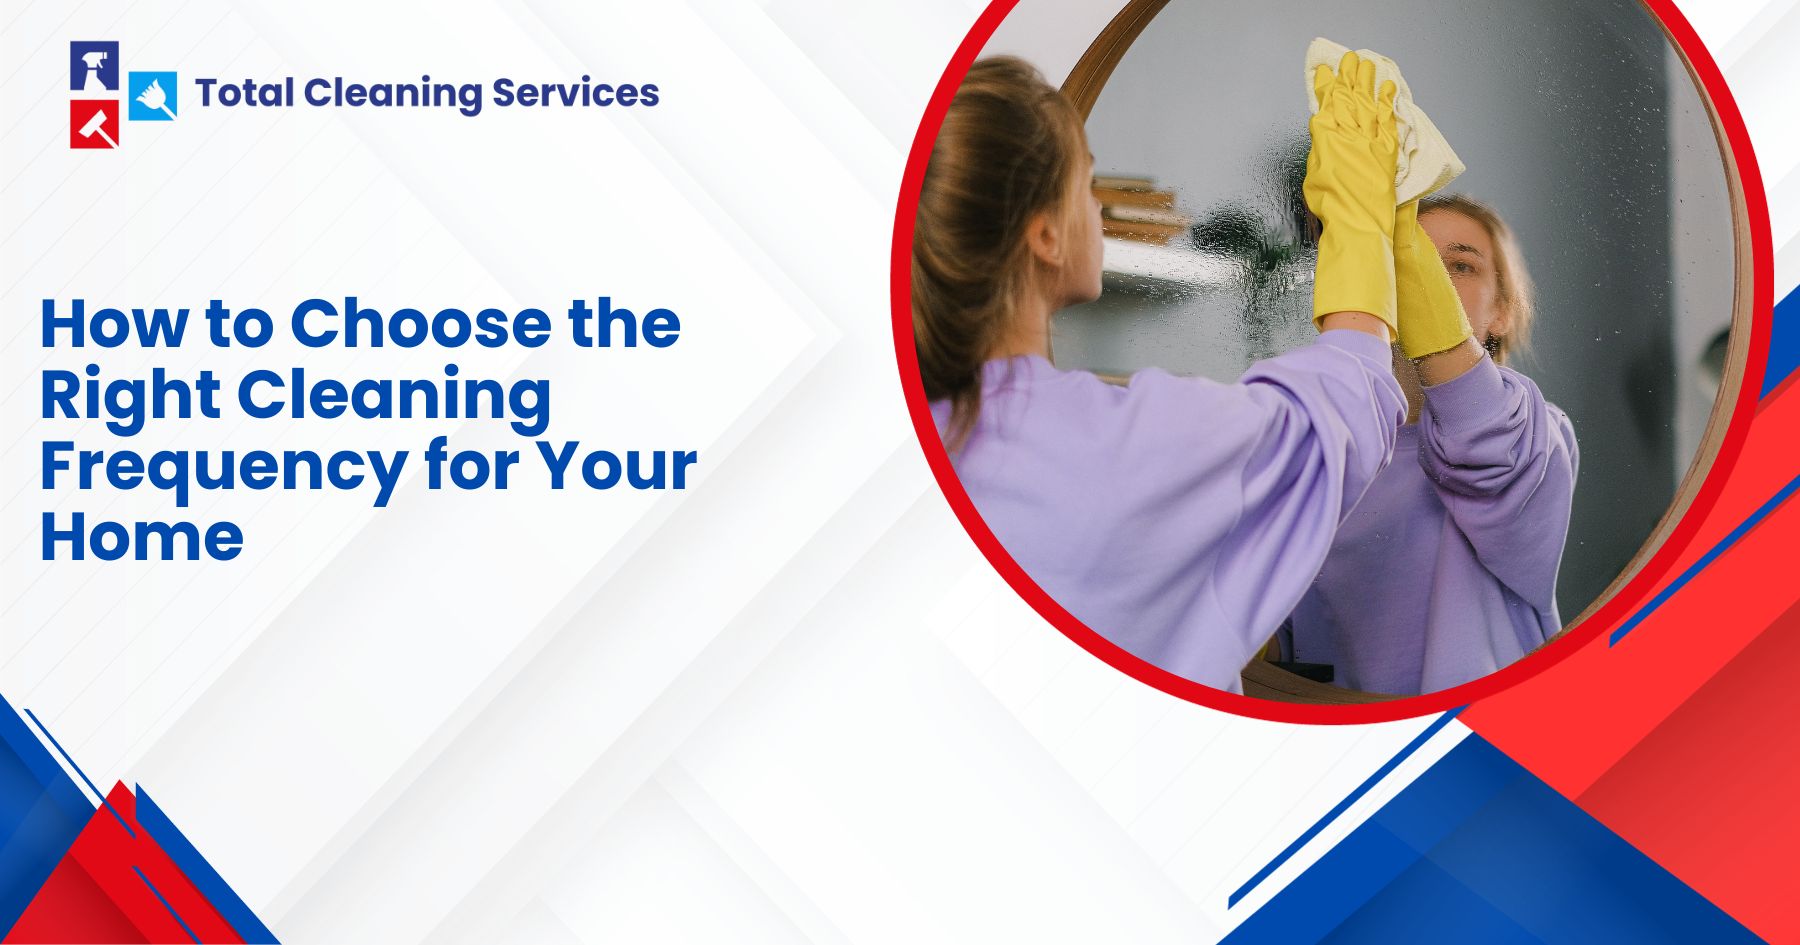 How to Choose the Right Cleaning Frequency for Your Home